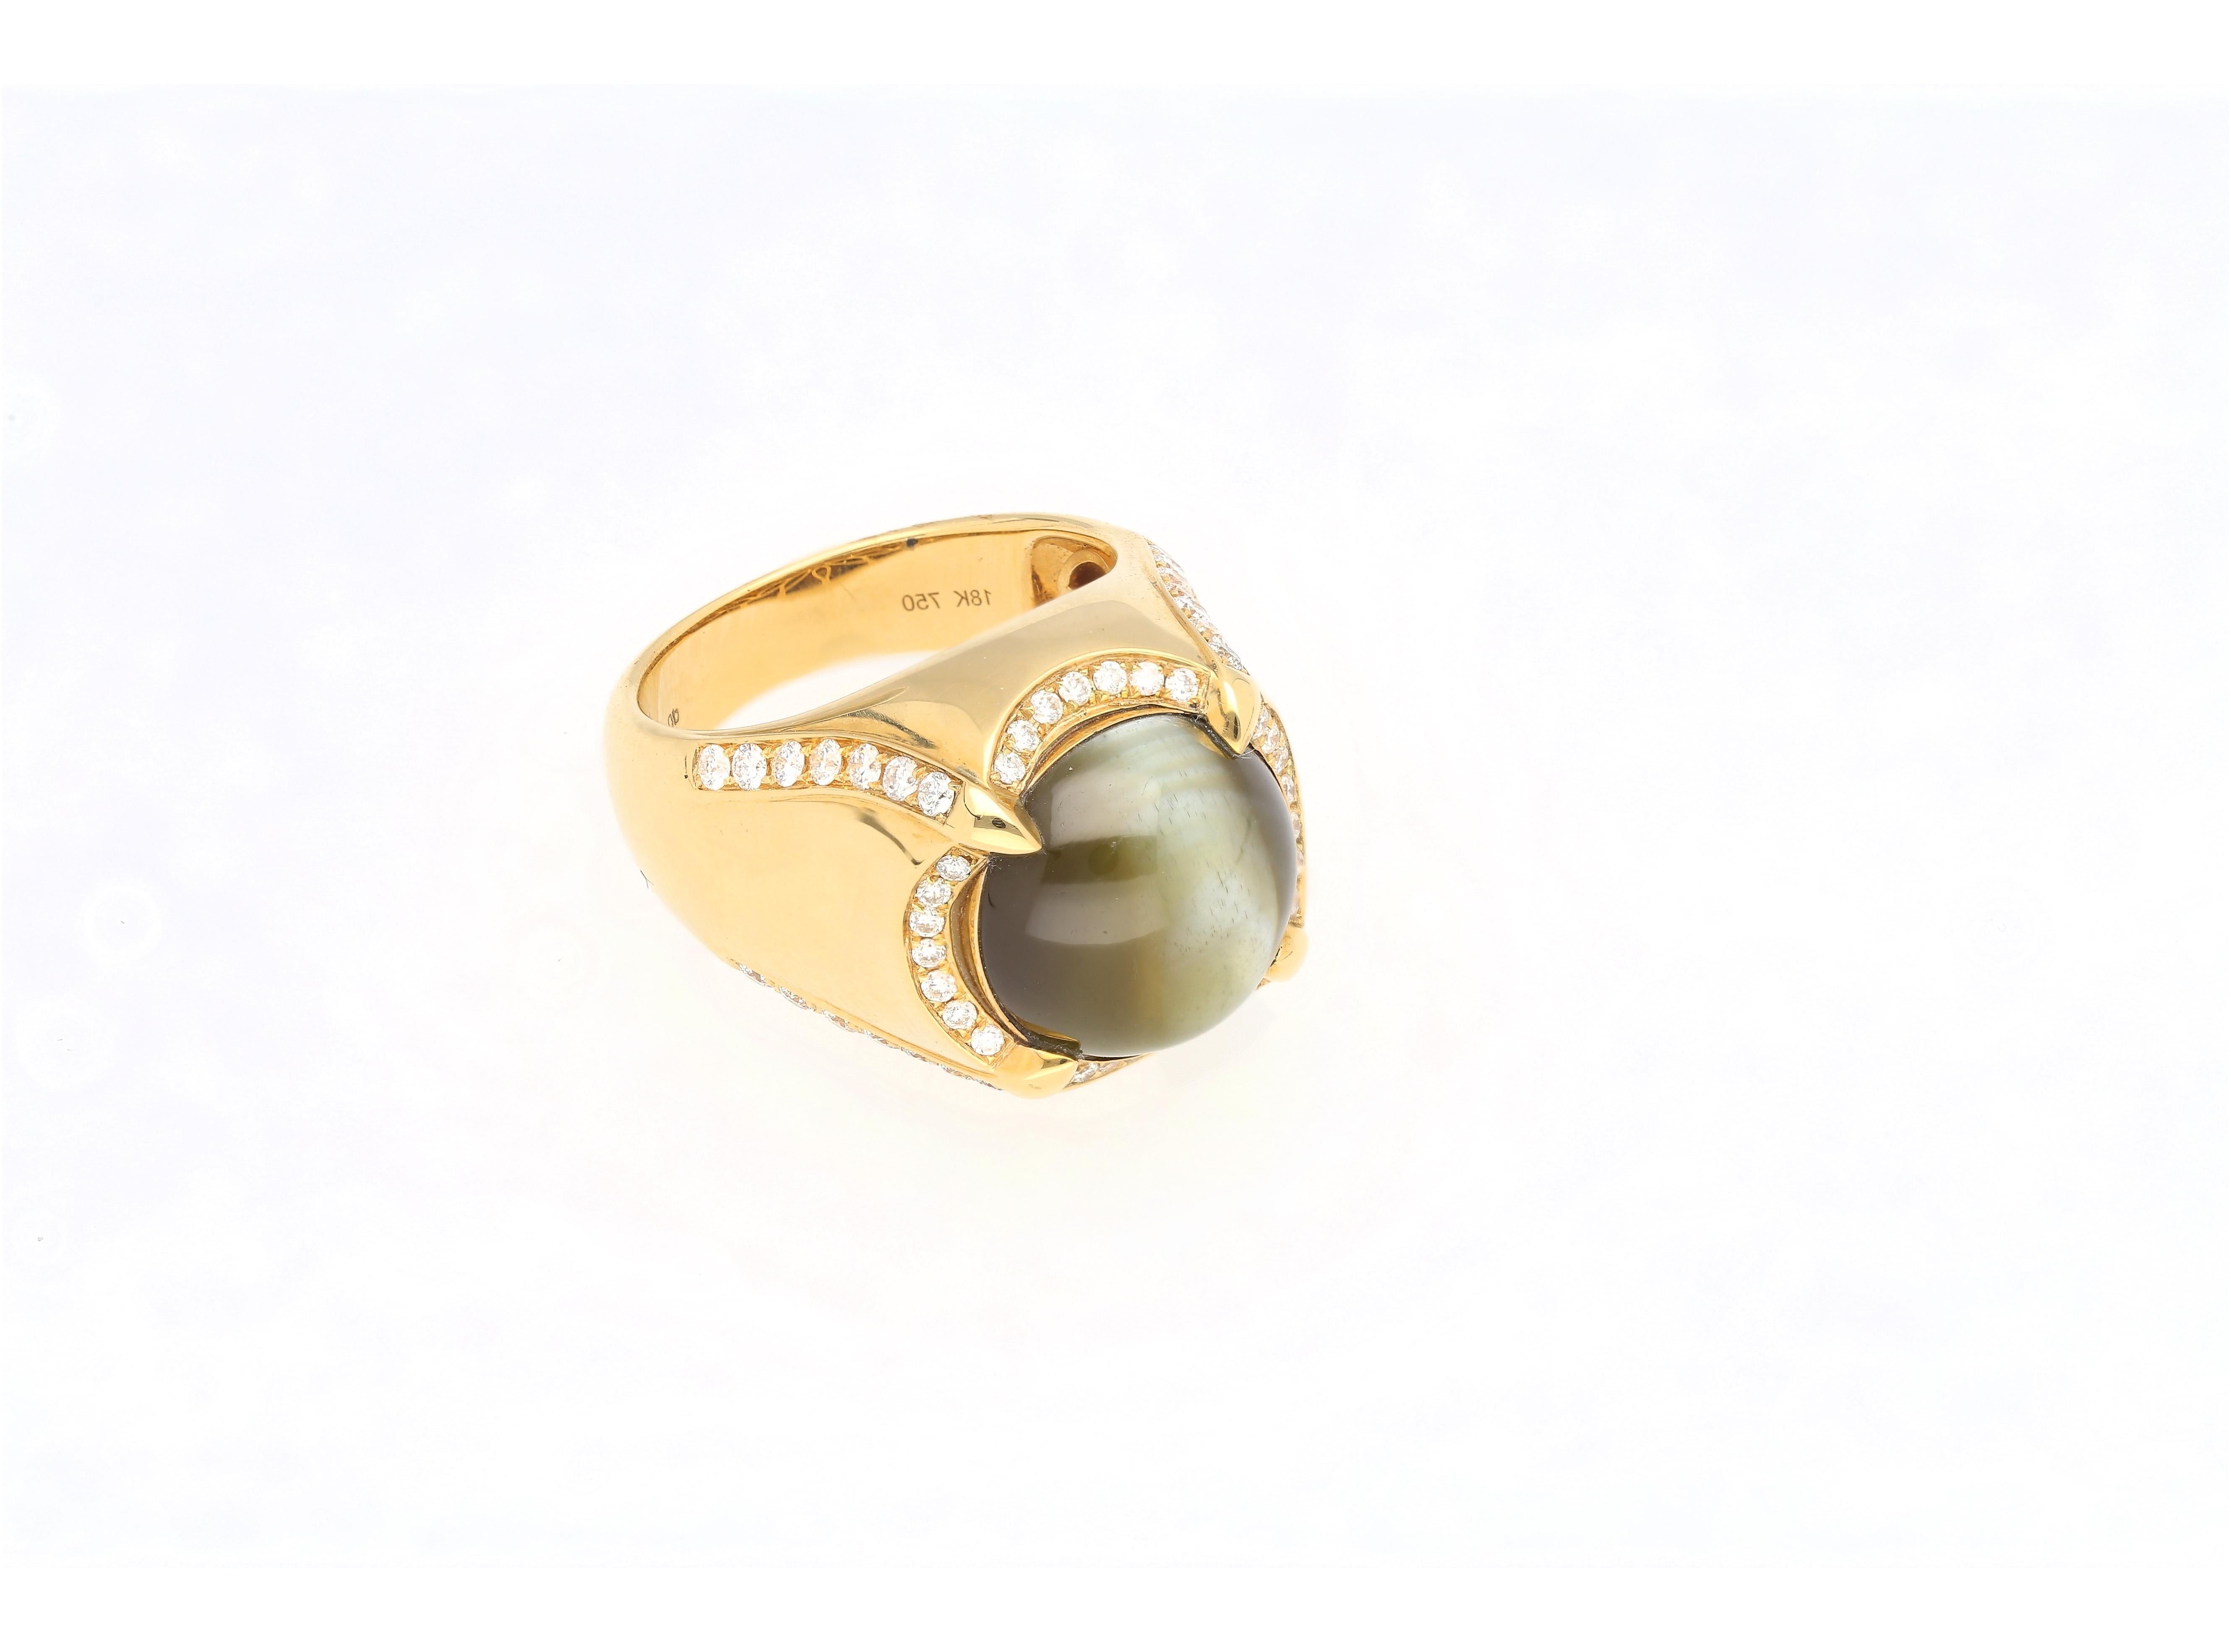 Cabochon GRS Certified 13.89 Carat Chrysoberyl Cats Eye Mens 18K Gold Ring For Sale